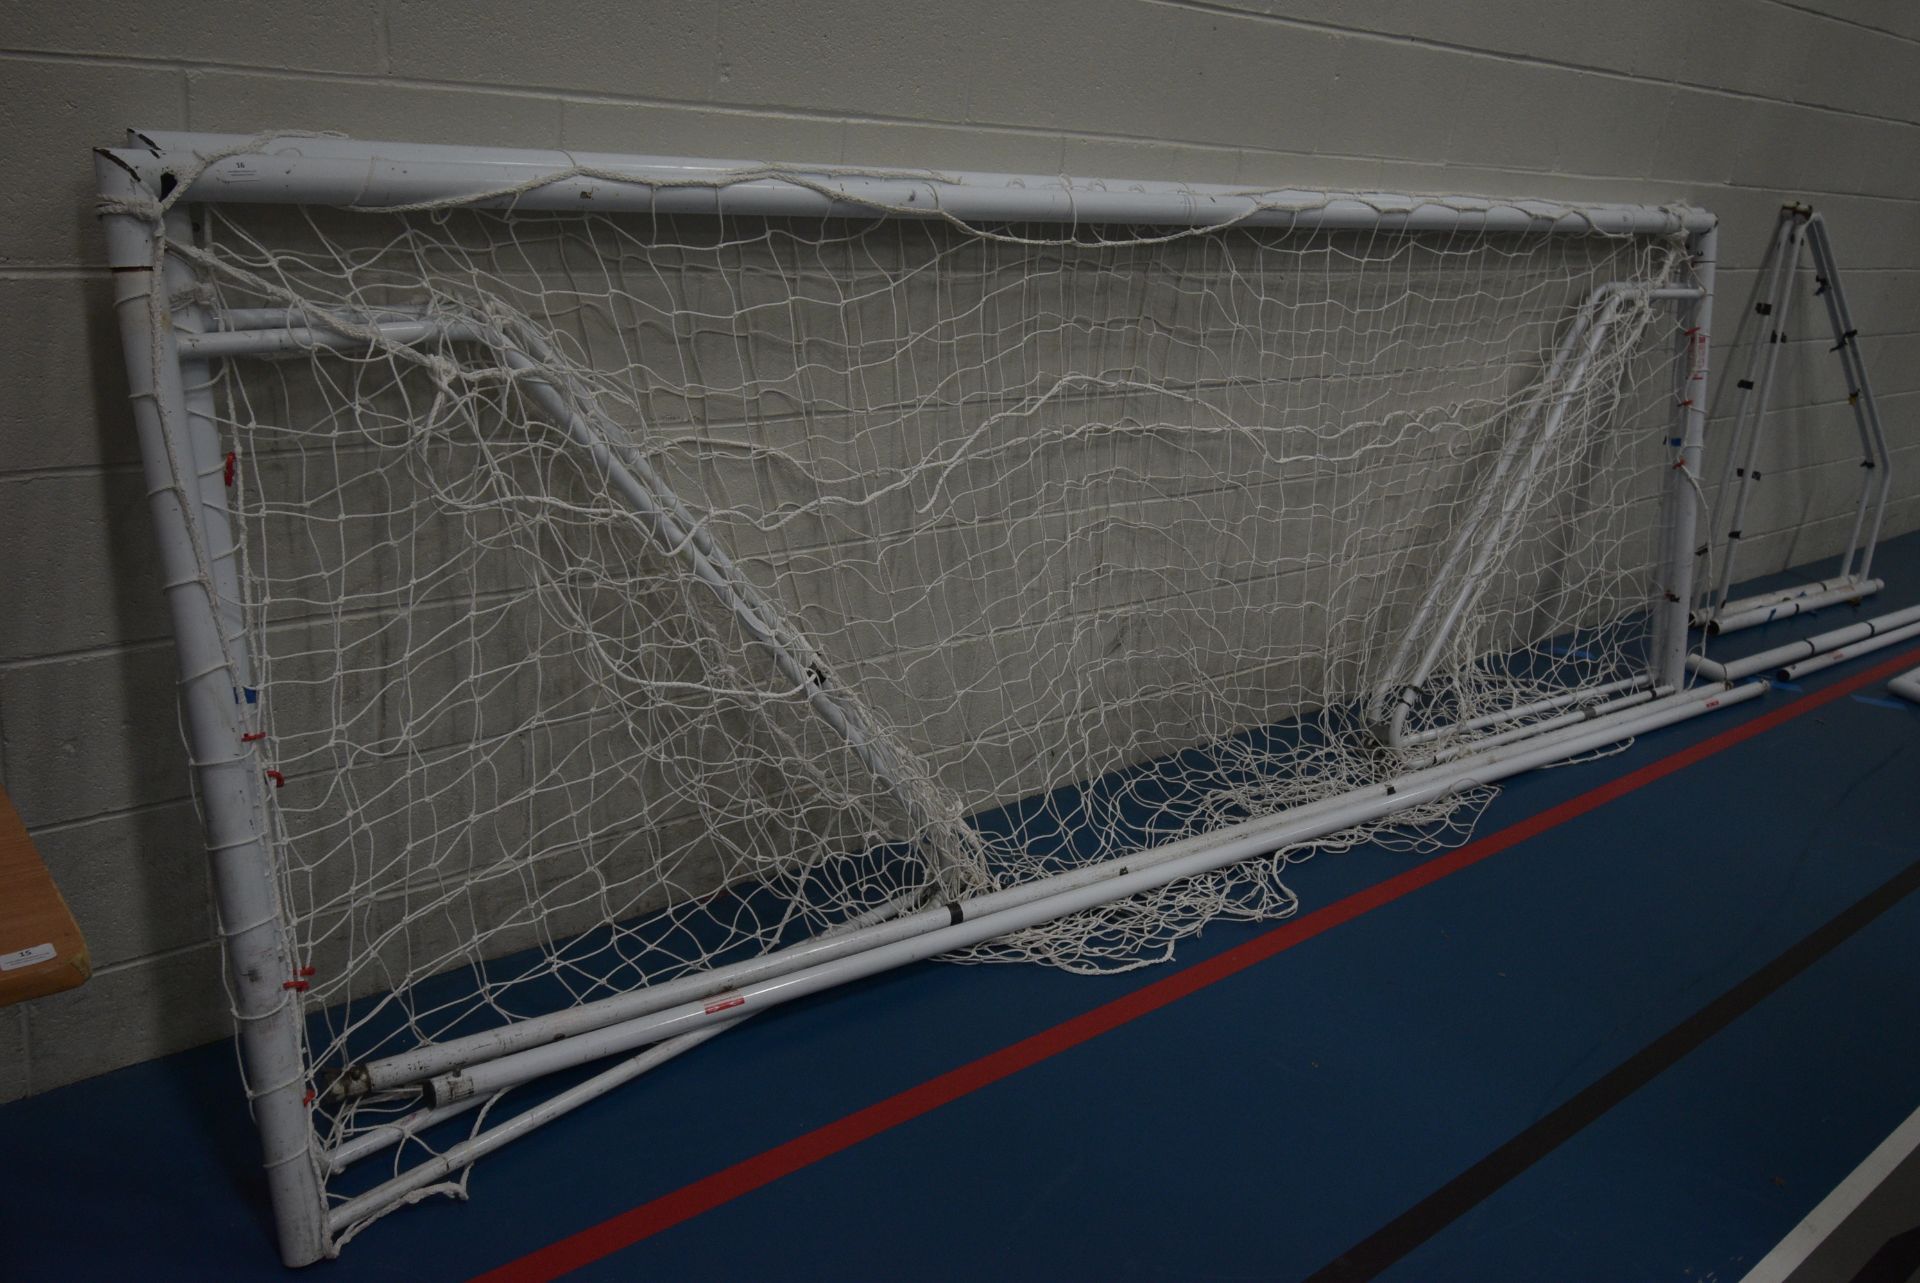 Pair of Gym Goals with Nets ~4m long x 1.2m high